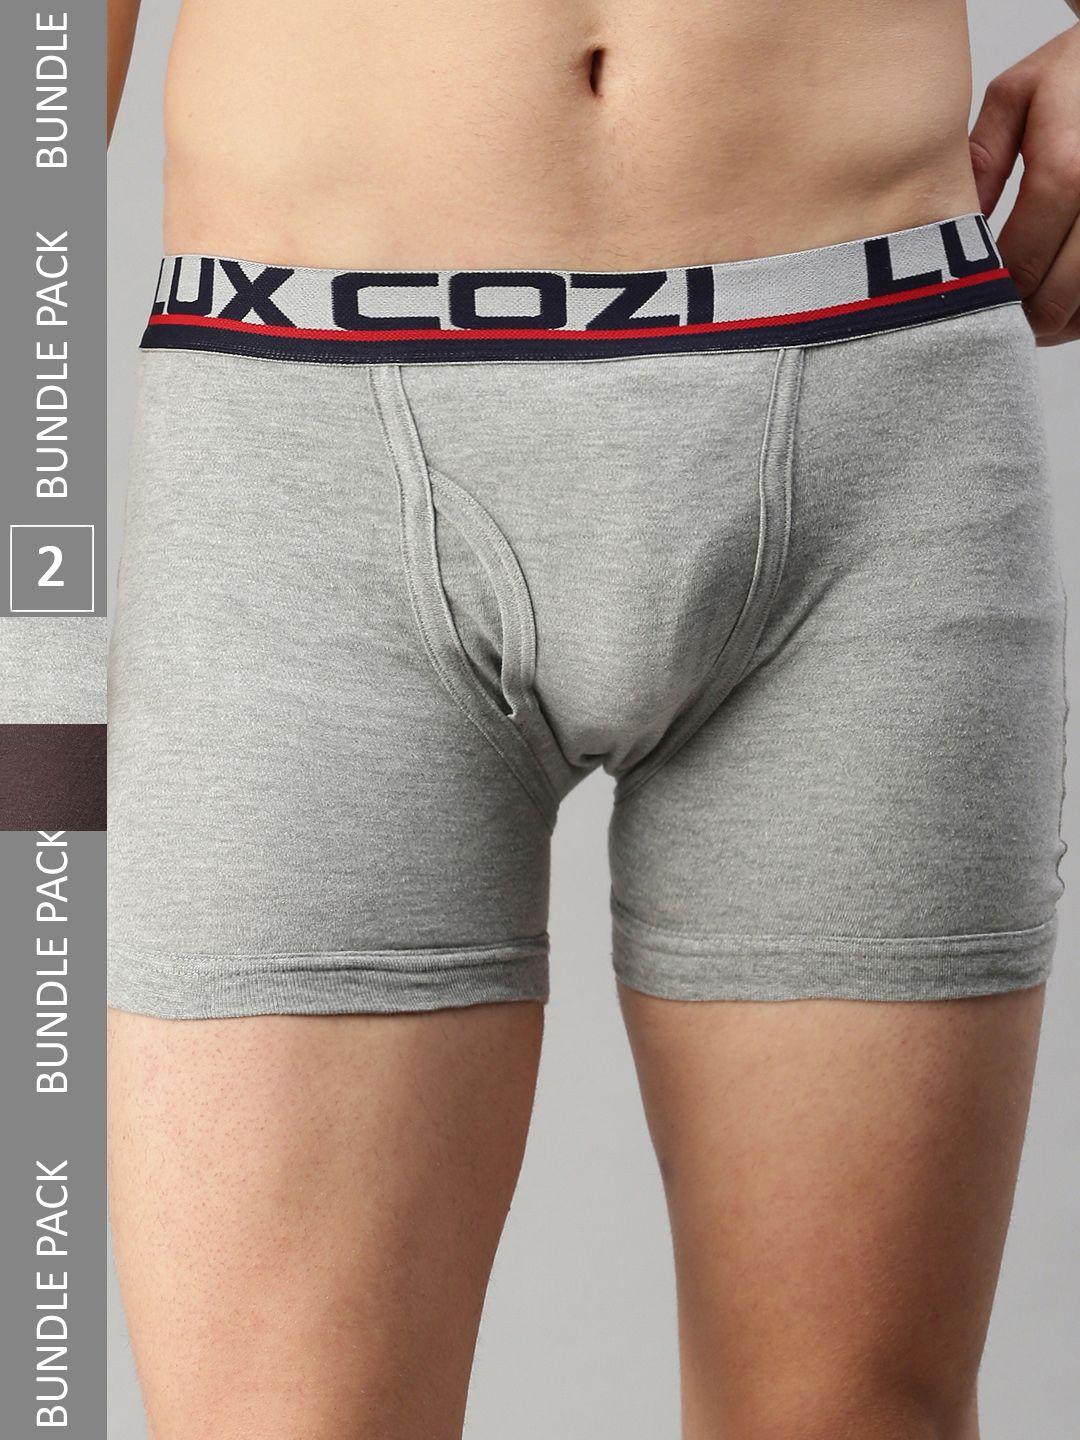 lux cozi men pack of 2 pure cotton anti-bacterial trunks cozi_glo_intlock_cof_gm_2pc